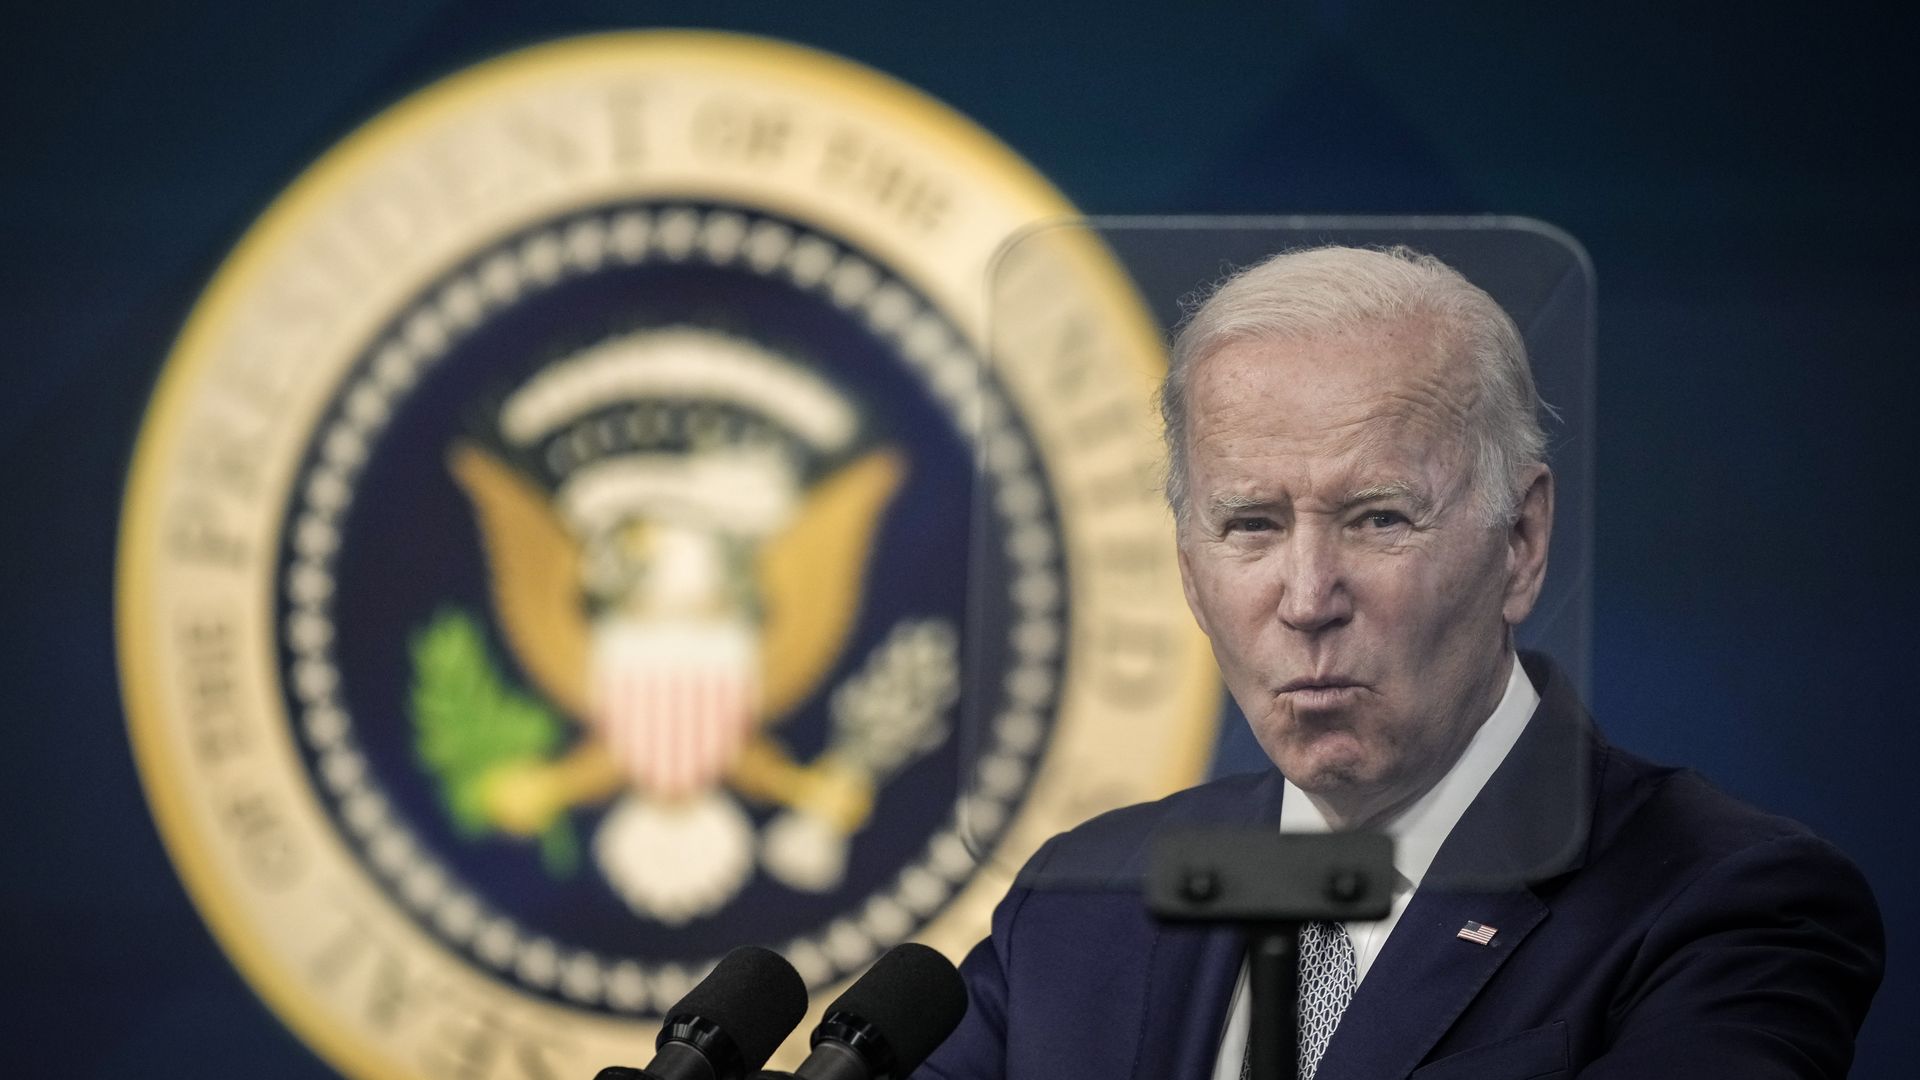 President Biden is seen through the pane of a TelePrompTer as he speaks about inflation on Tuesday.